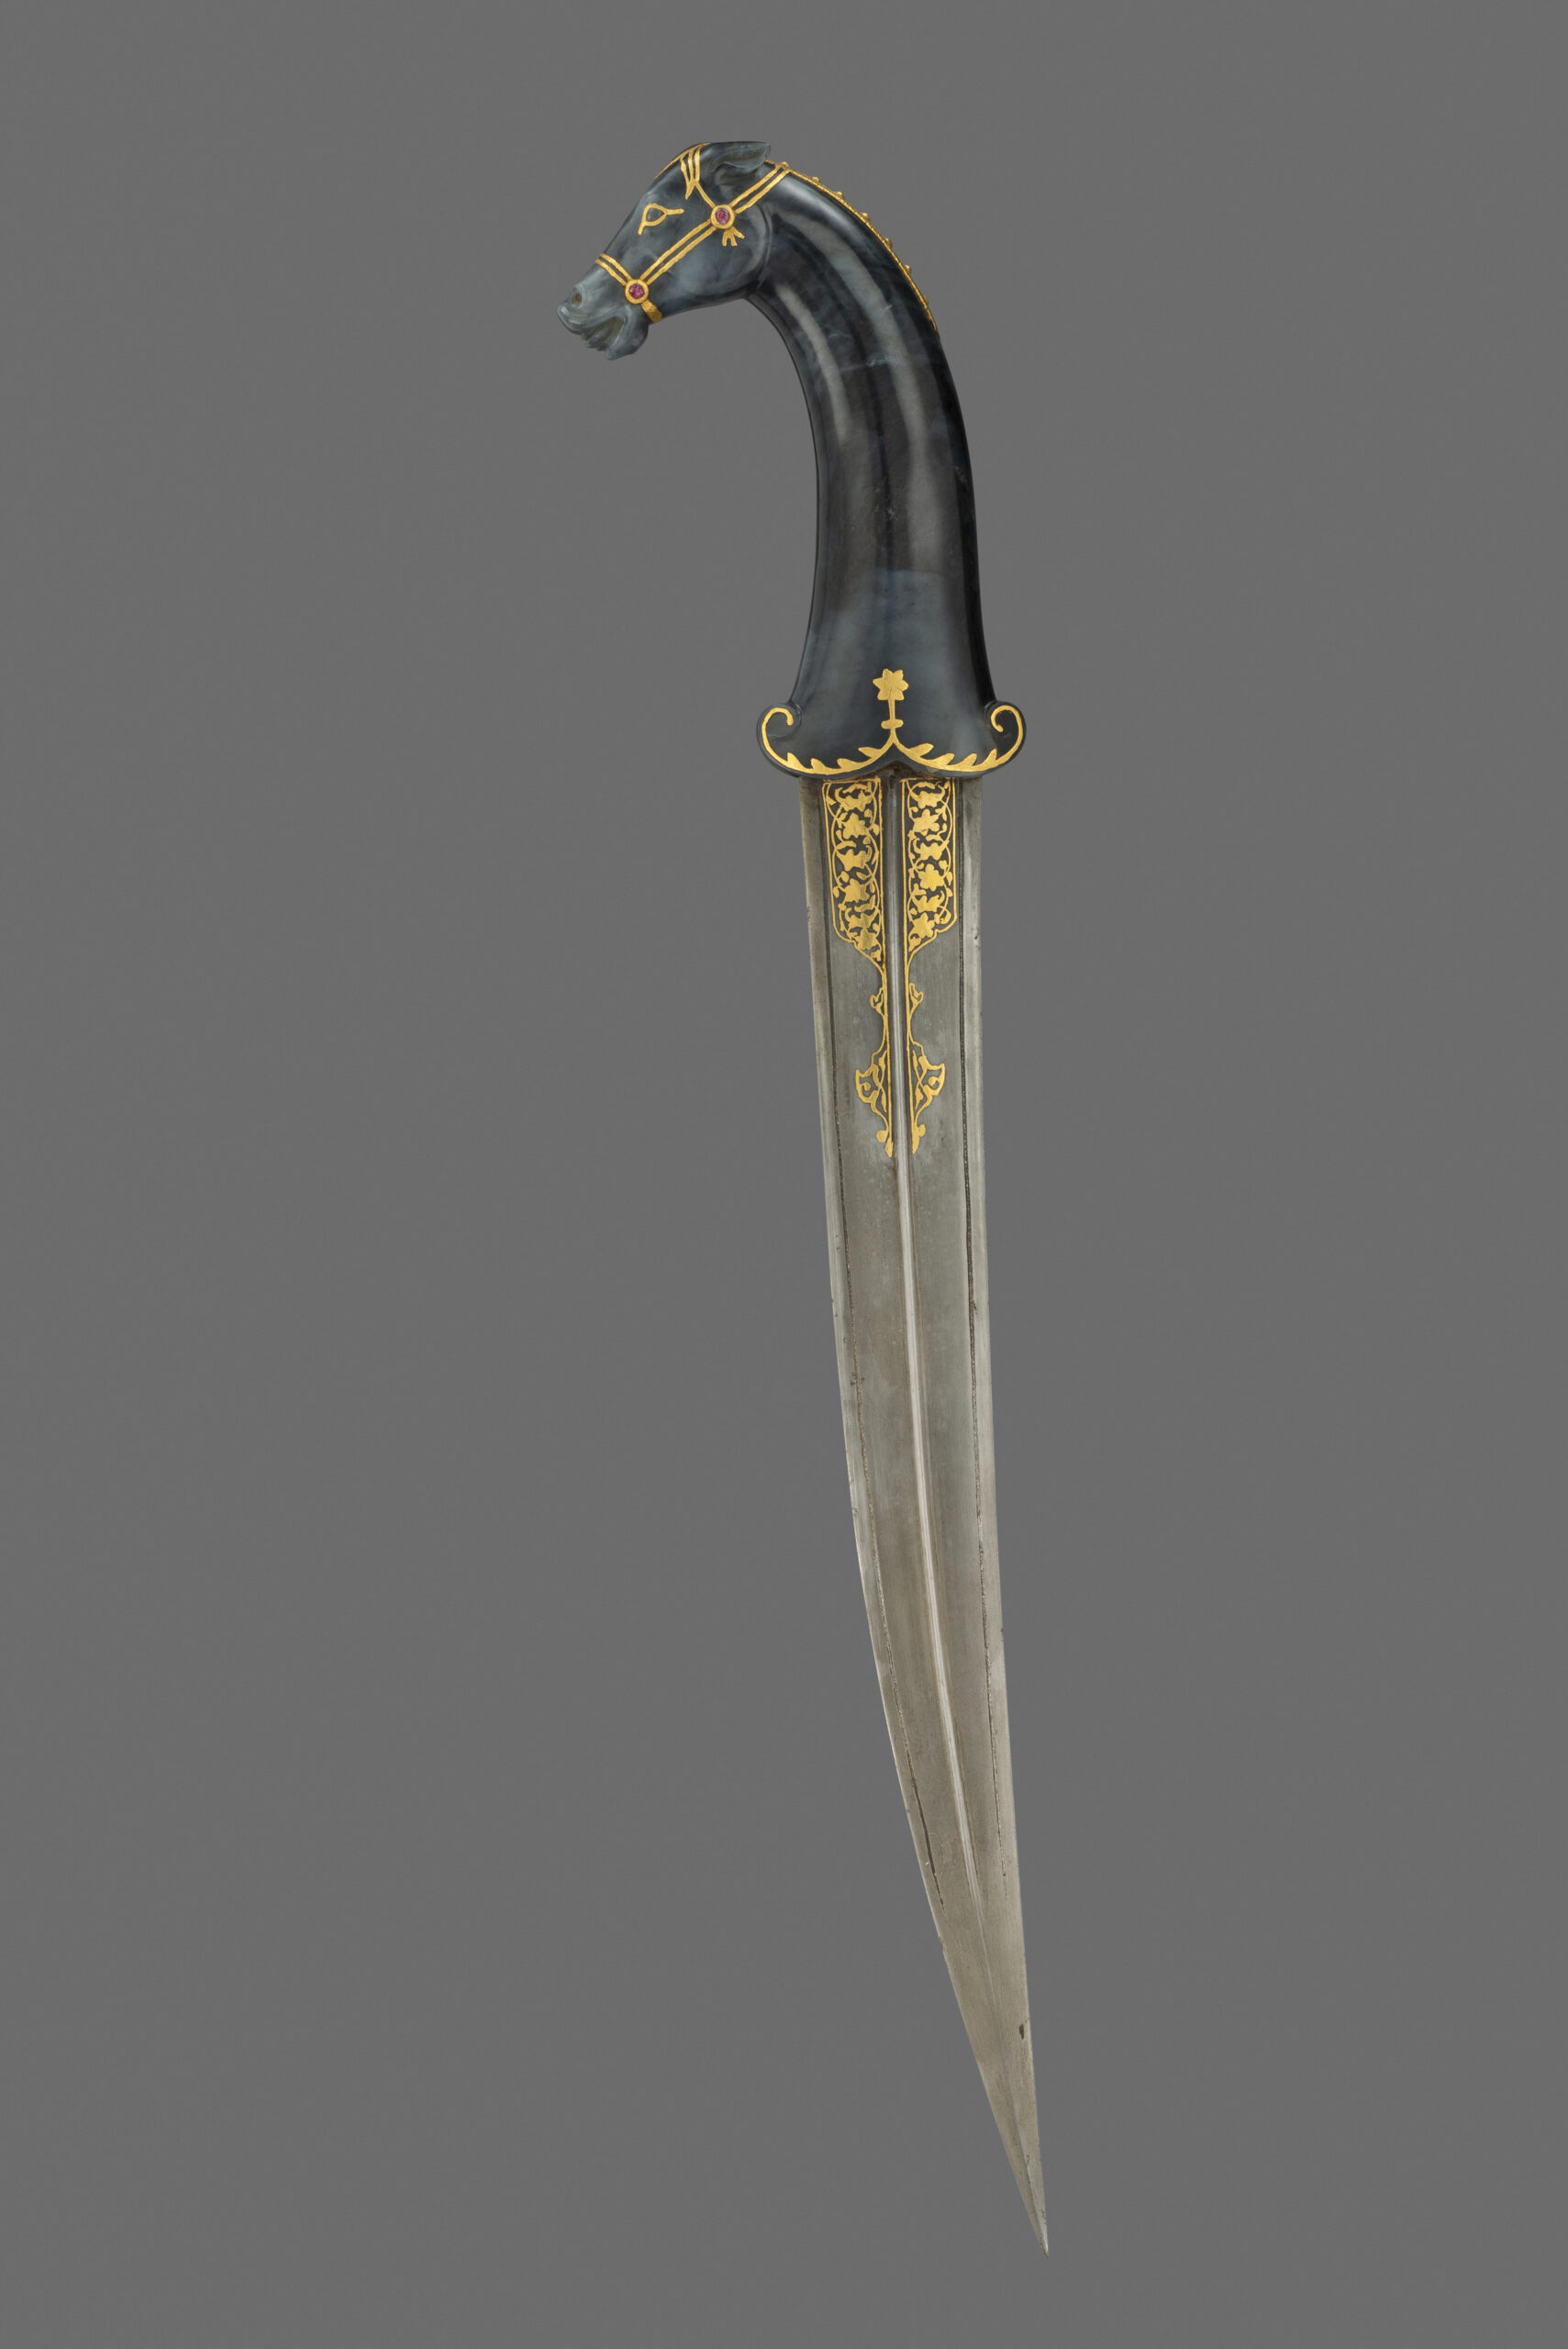 A Very Fine and Elegant Indian Khanjar. Mughal, hilt late 17th–early 18th century, blade 19th century